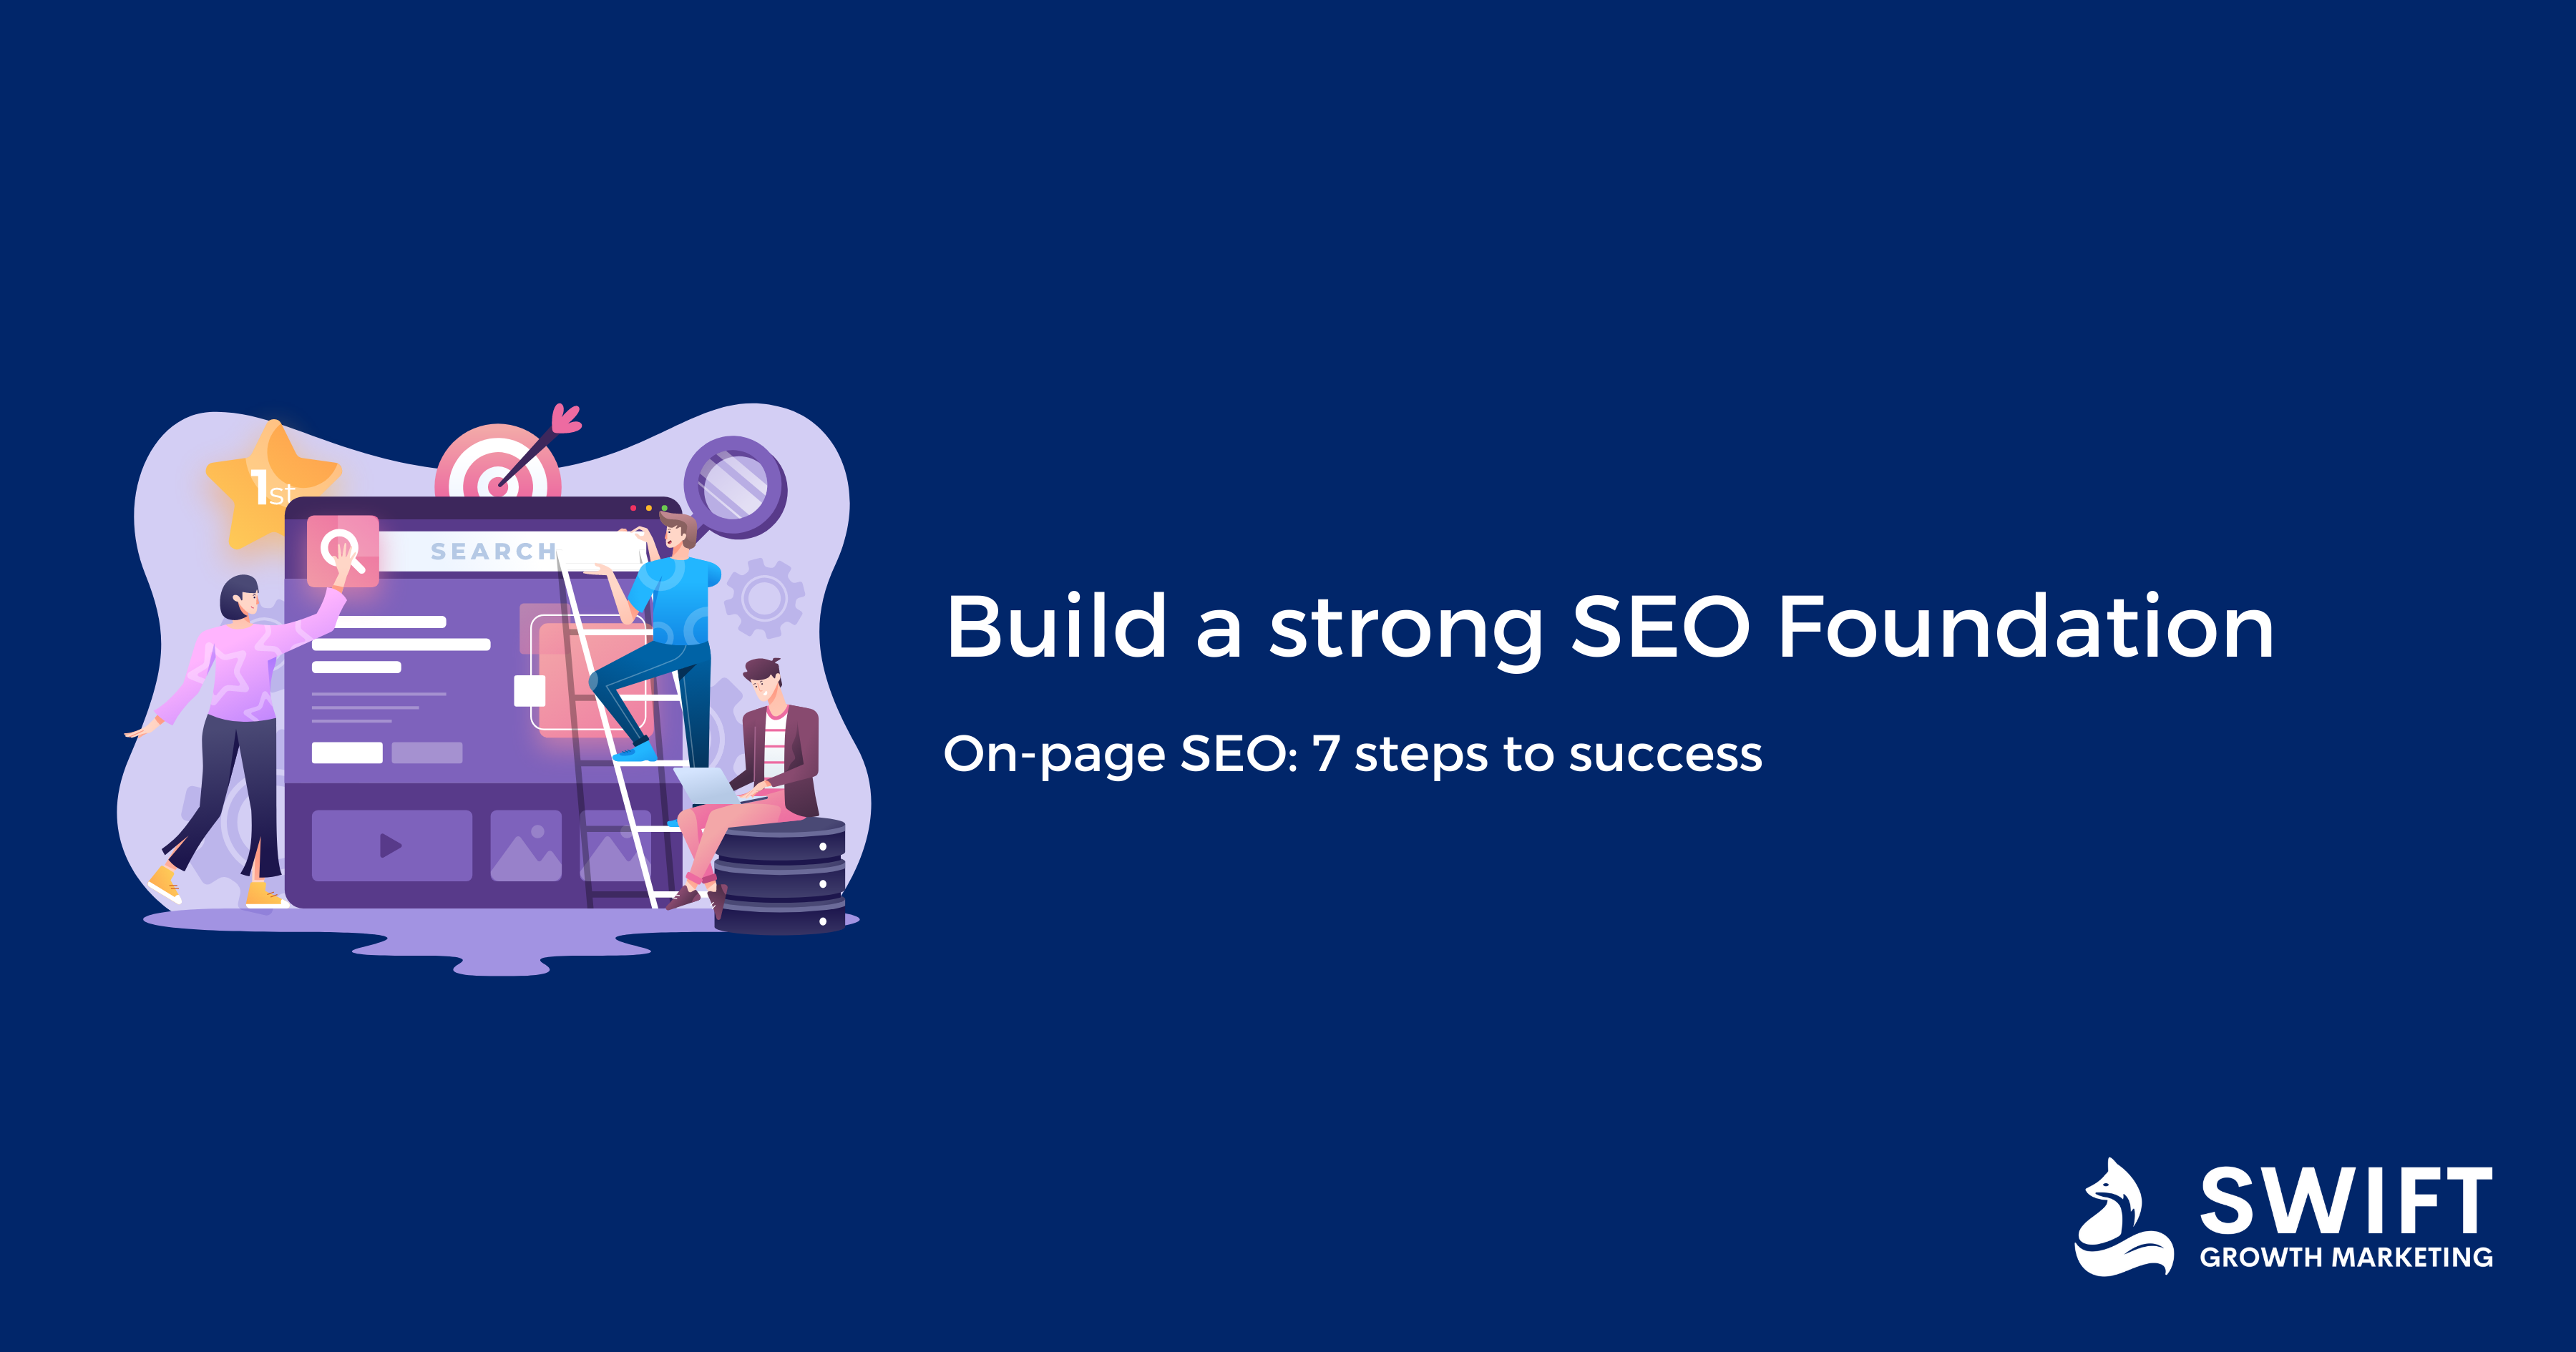 How to build a strong SEO foundation with on-page SEO